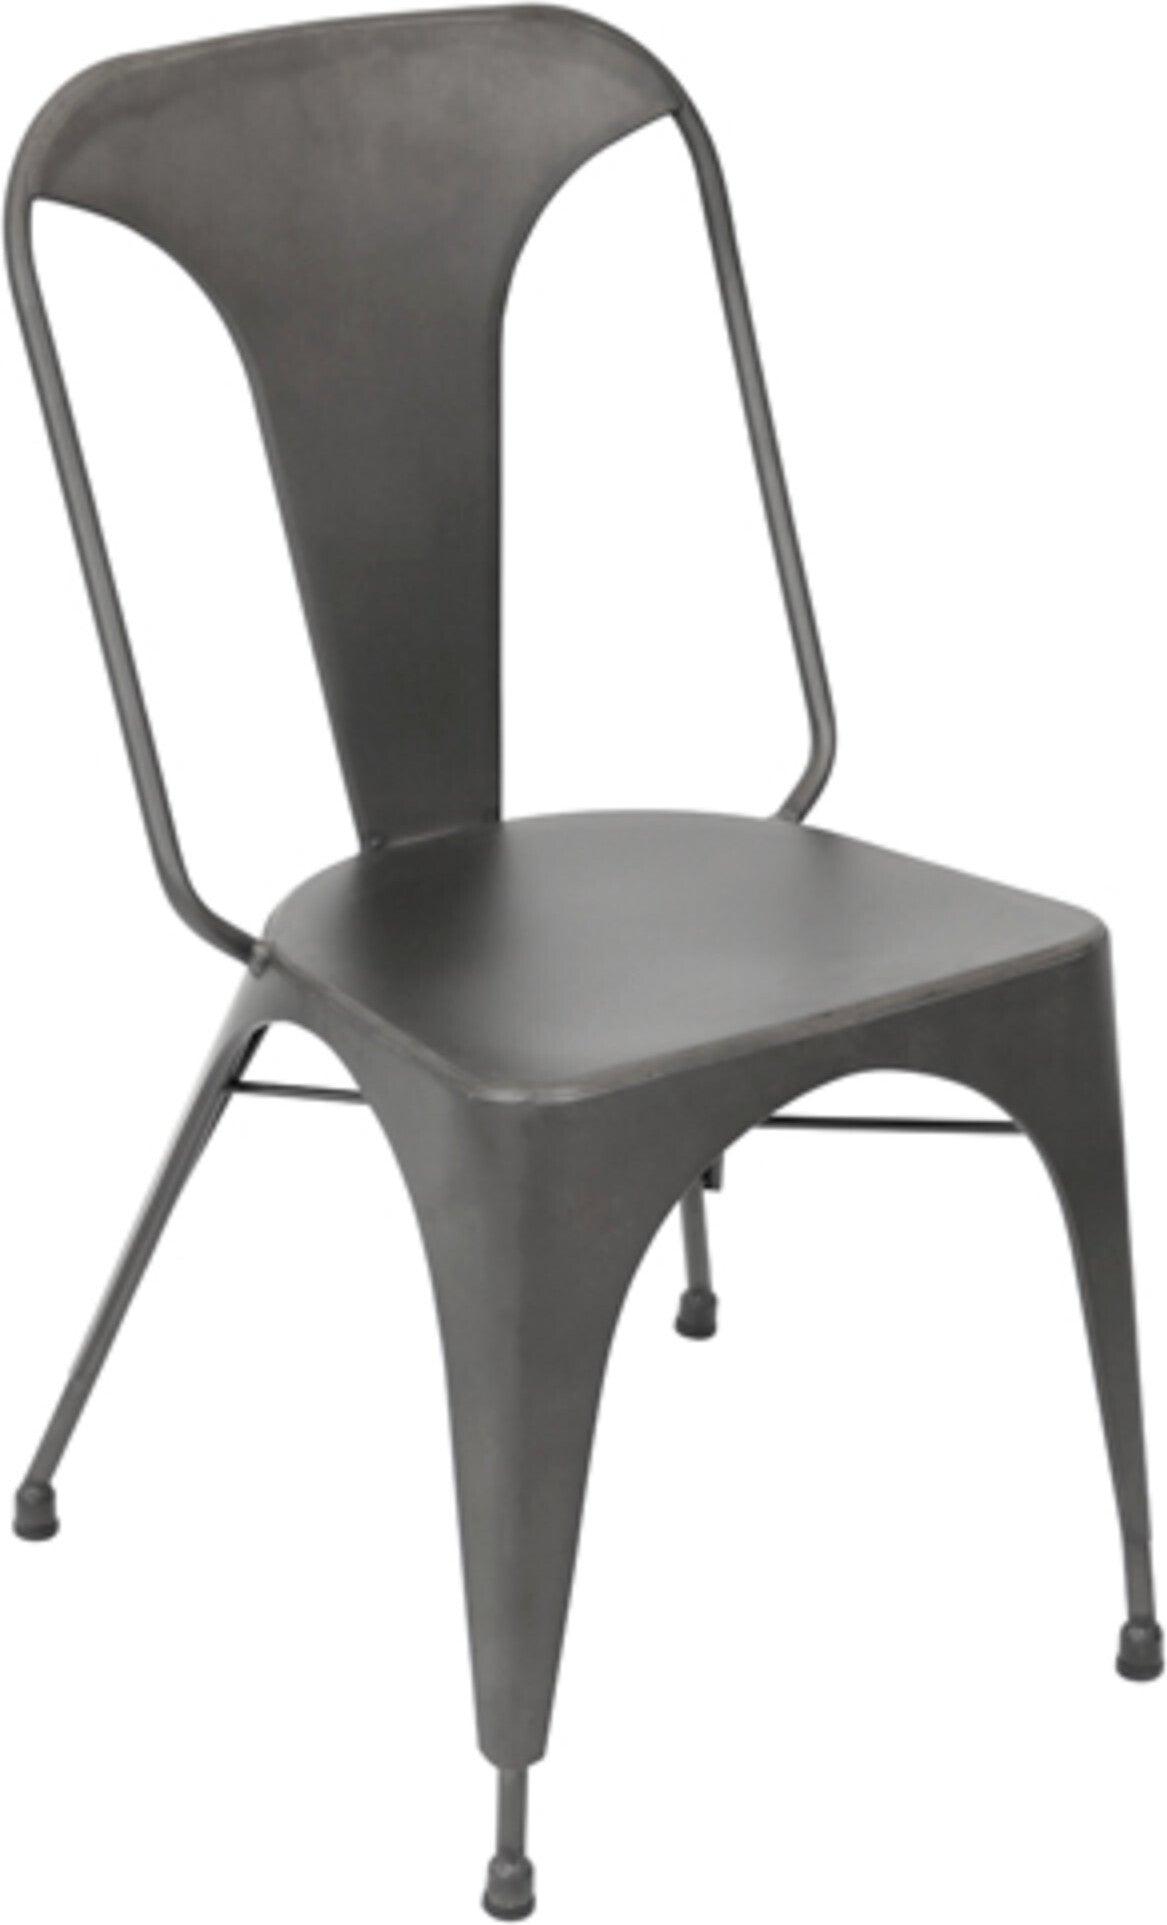 Lumisource Dining Chairs - Austin Industrial Dining Chair in Matte Grey (Set of 2)